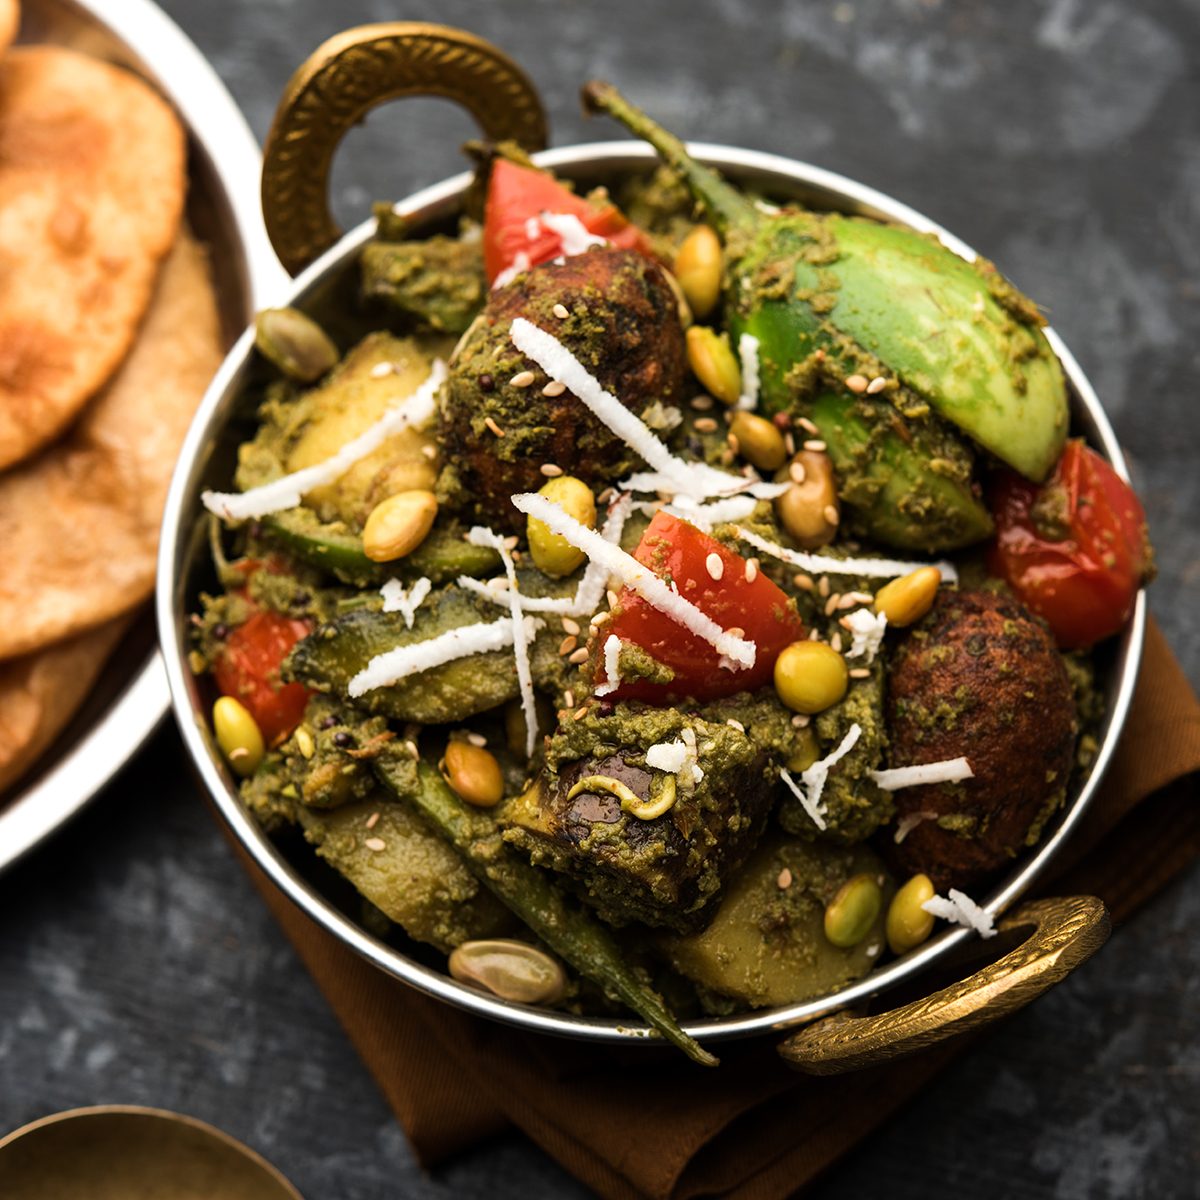 https://www.tasteofhome.com/wp-content/uploads/2021/01/undhiyu-is-a-gujarati-mixed-vegetable-dish-1177421198.jpg?fit=680%2C680